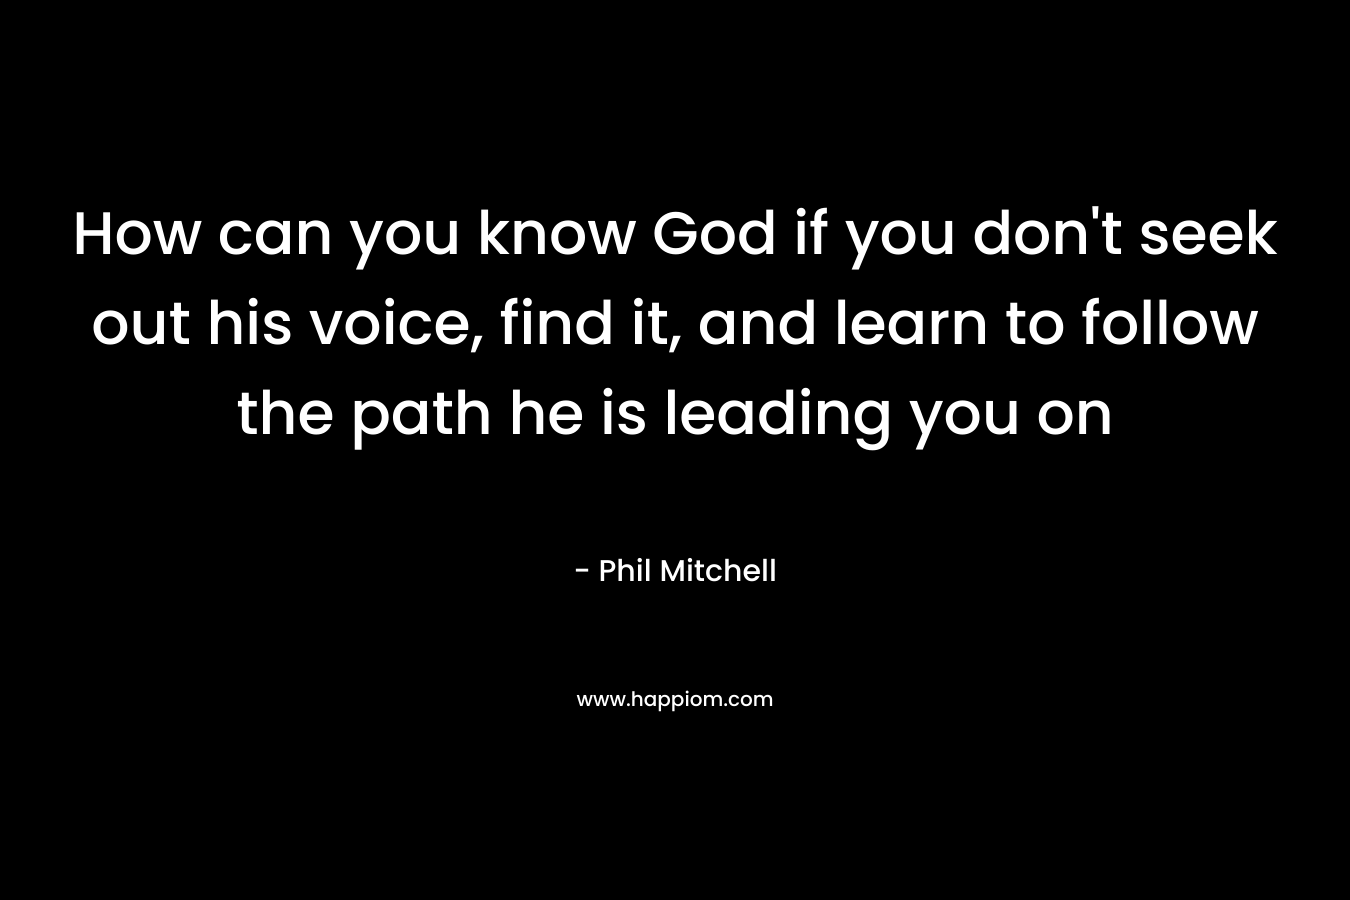 How can you know God if you don't seek out his voice, find it, and learn to follow the path he is leading you on